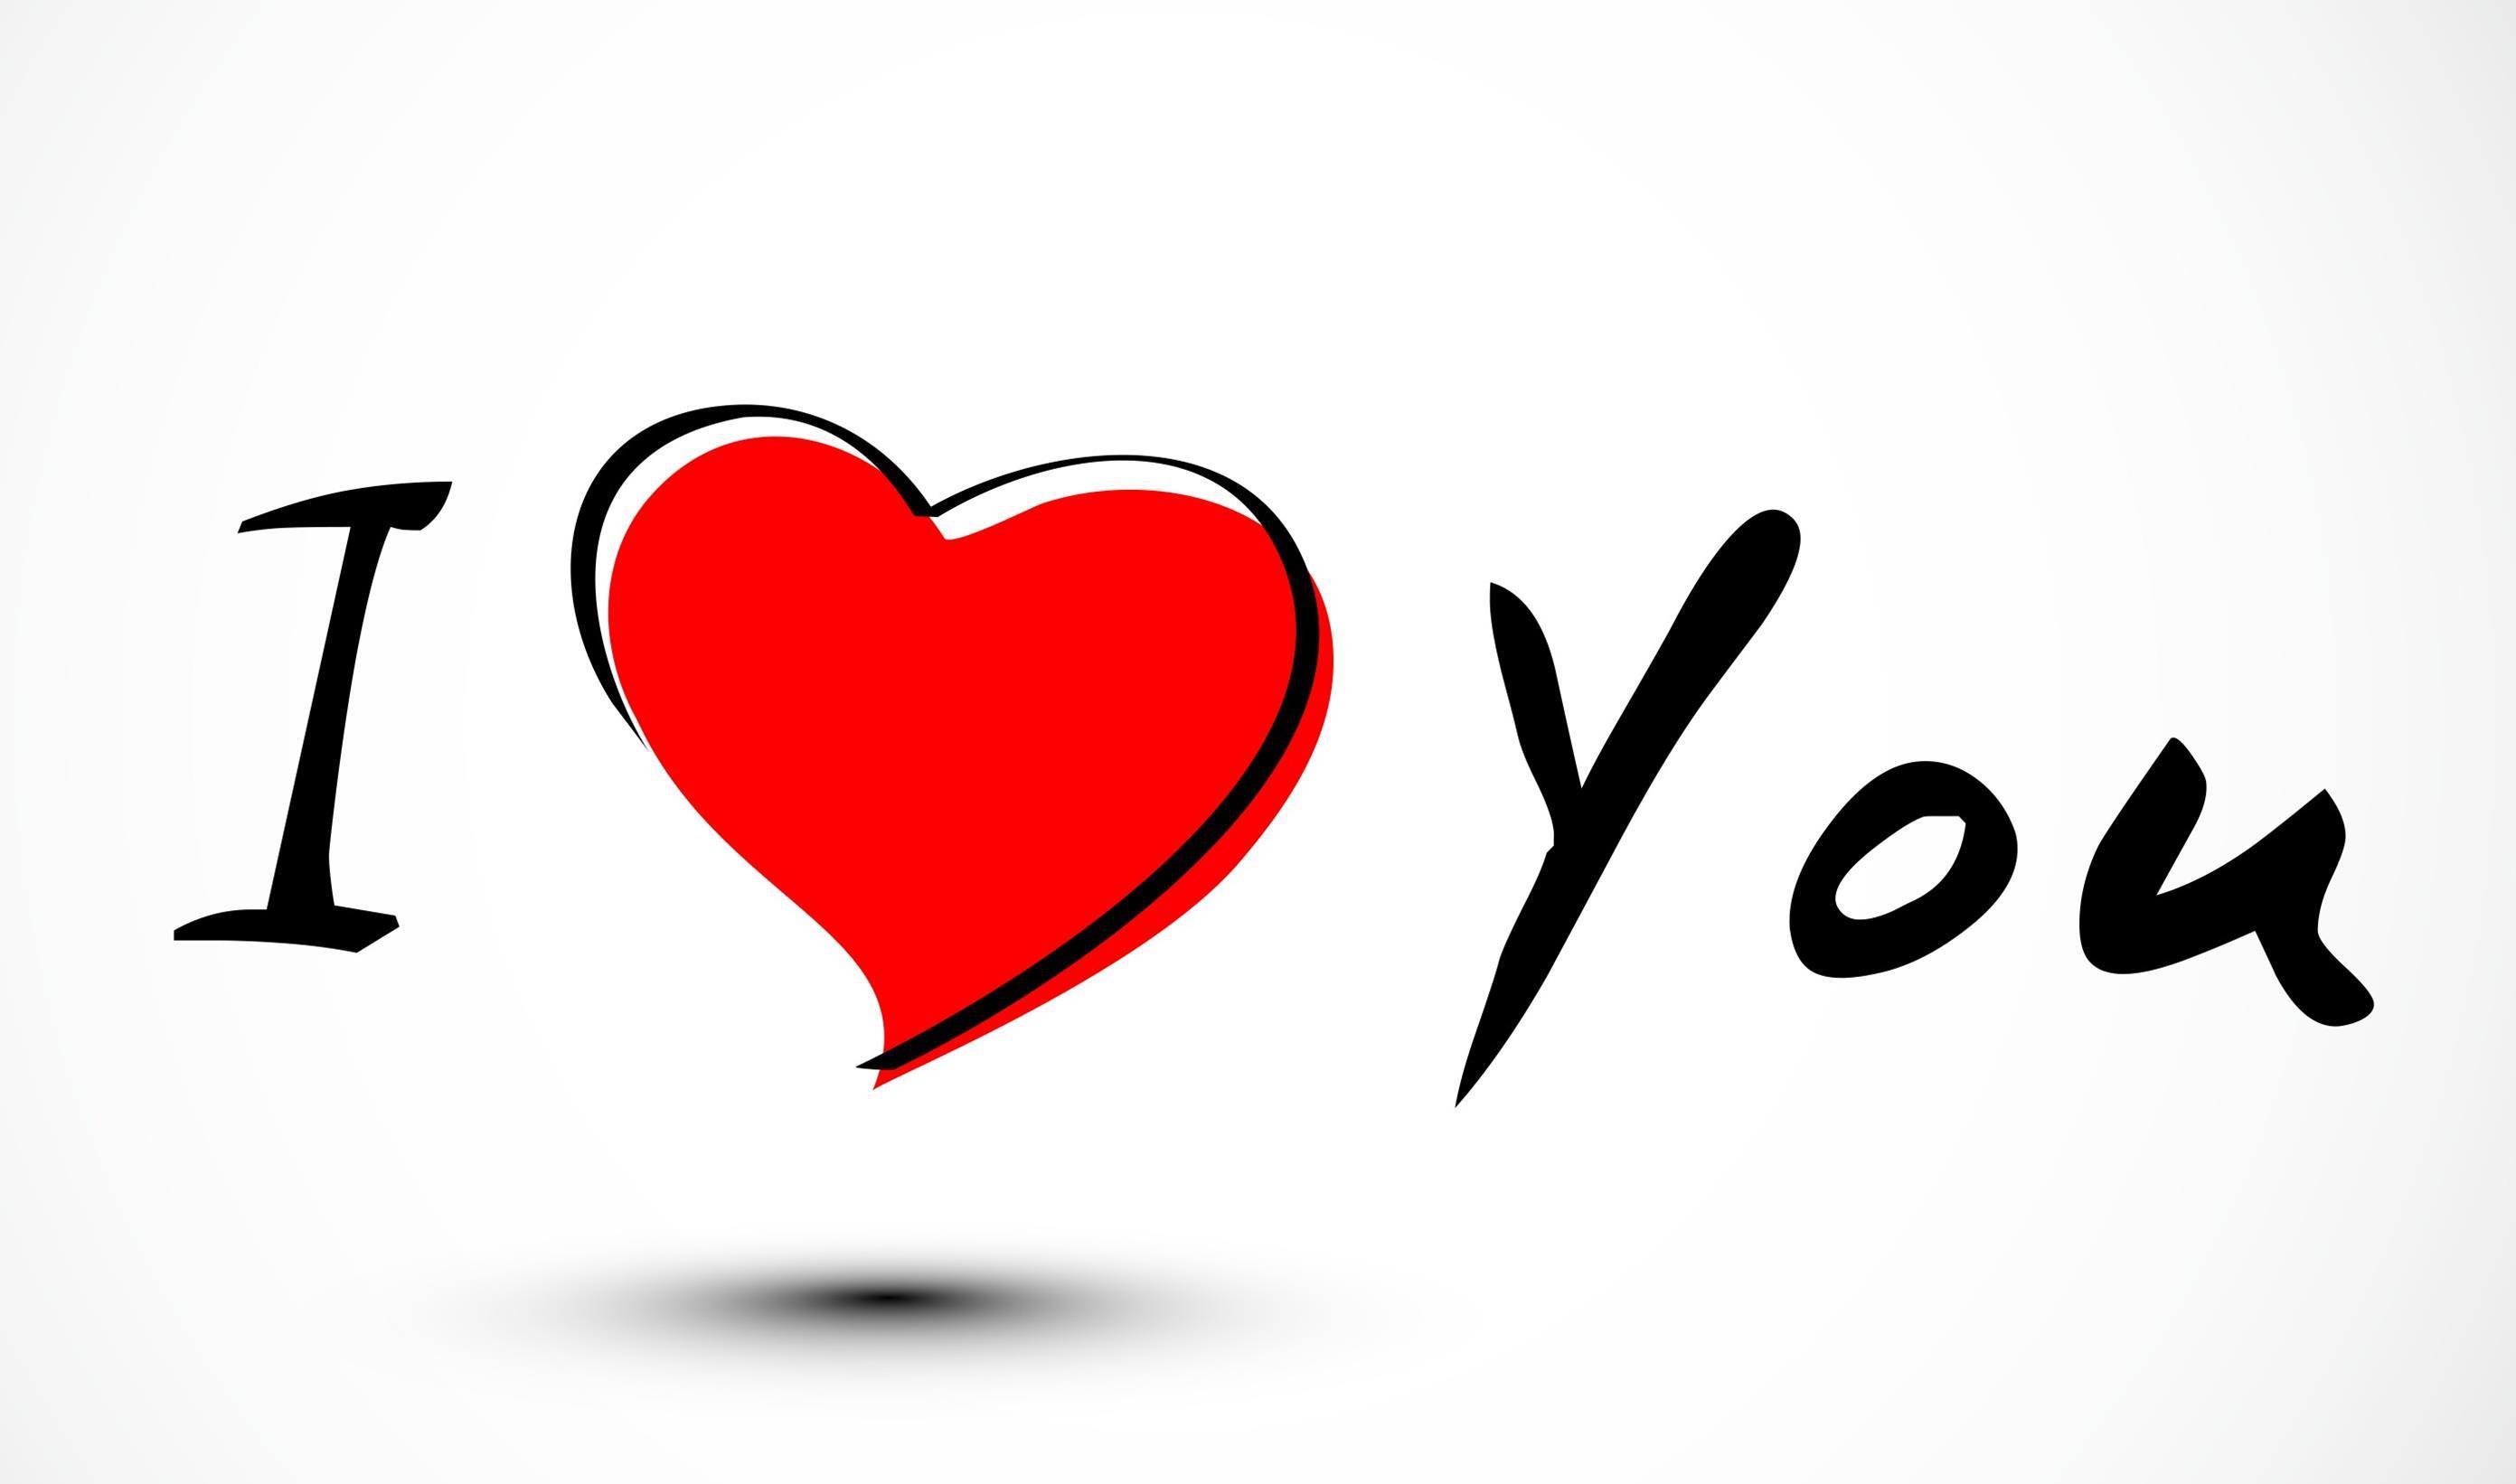 I Love You Wallpaper Image Photo Picture Background